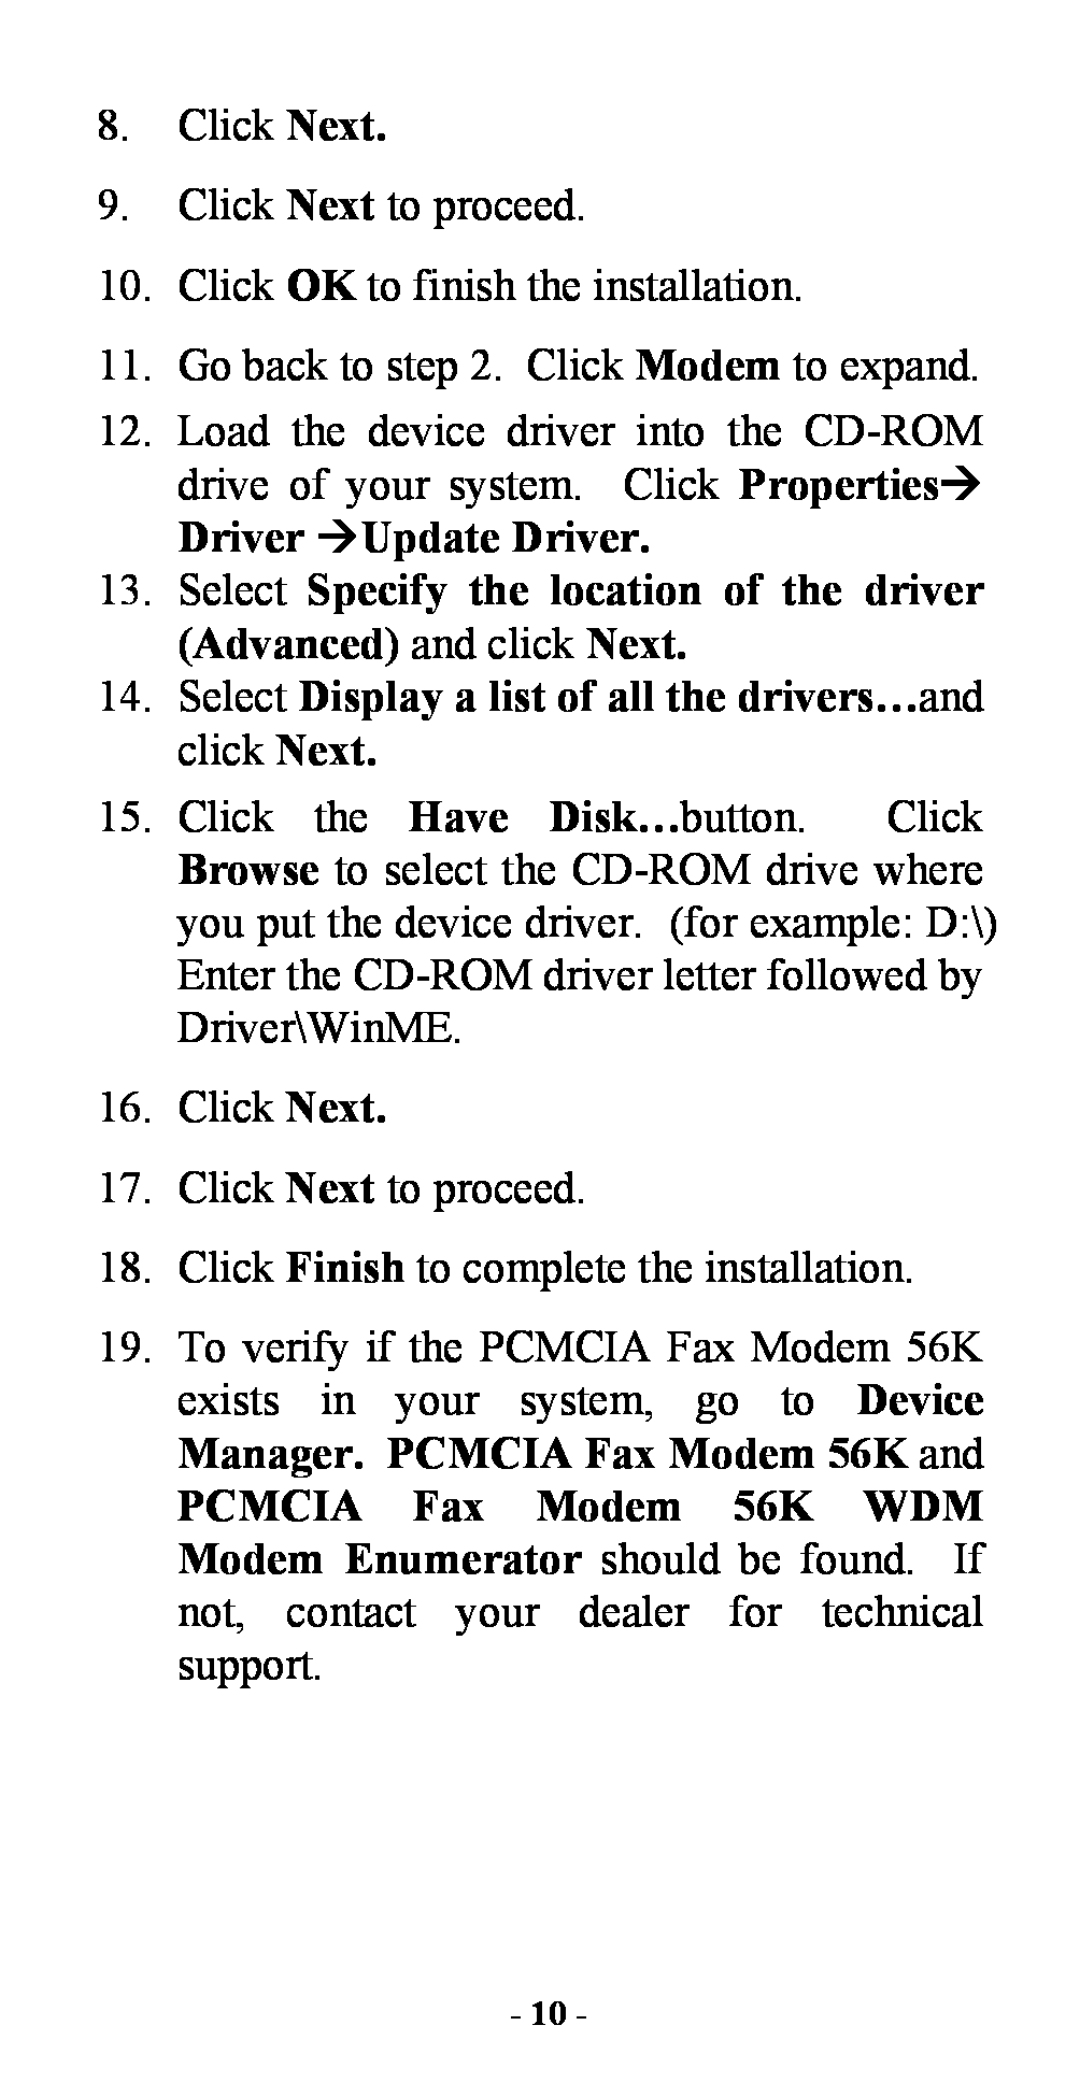 Abocom FM560C manual Driver ÆUpdate Driver, Select Specify the location of the driver Advanced and click Next 